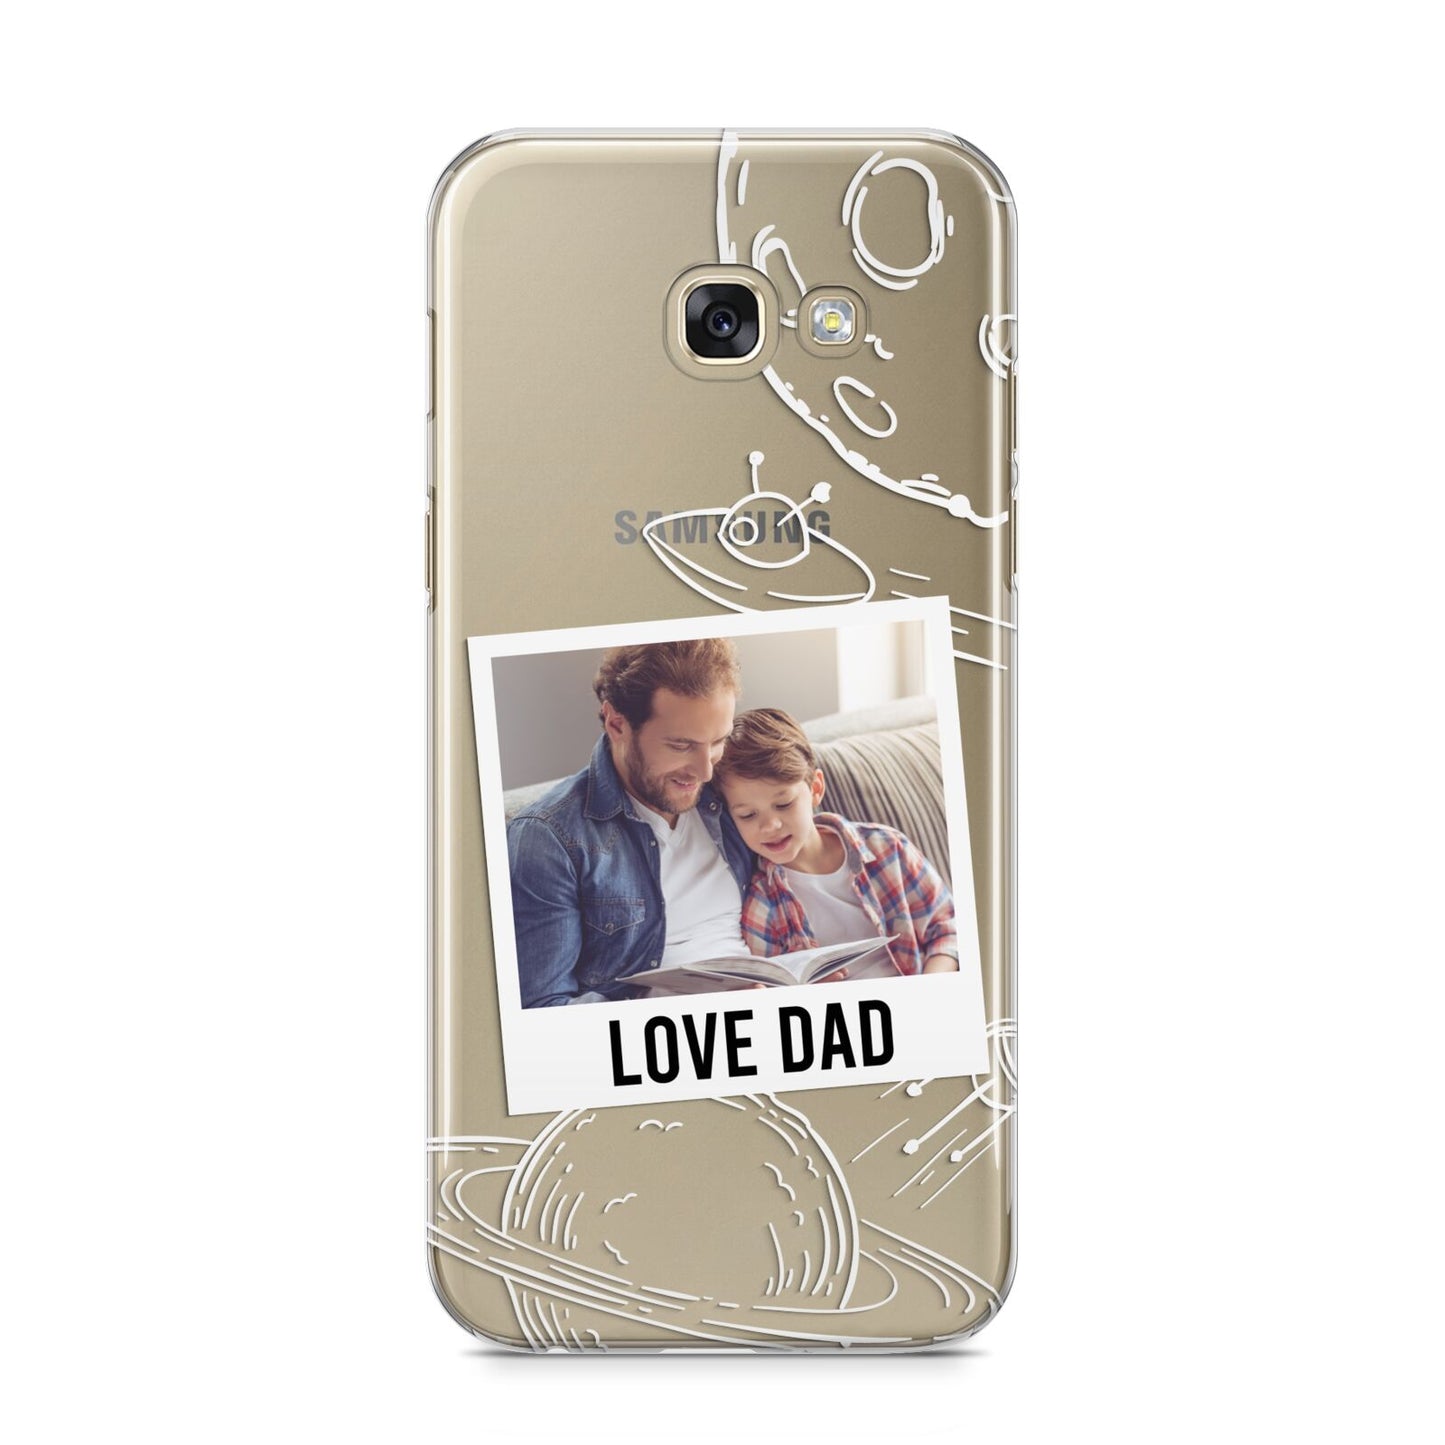 Personalised From Dad Photo Samsung Galaxy A5 2017 Case on gold phone